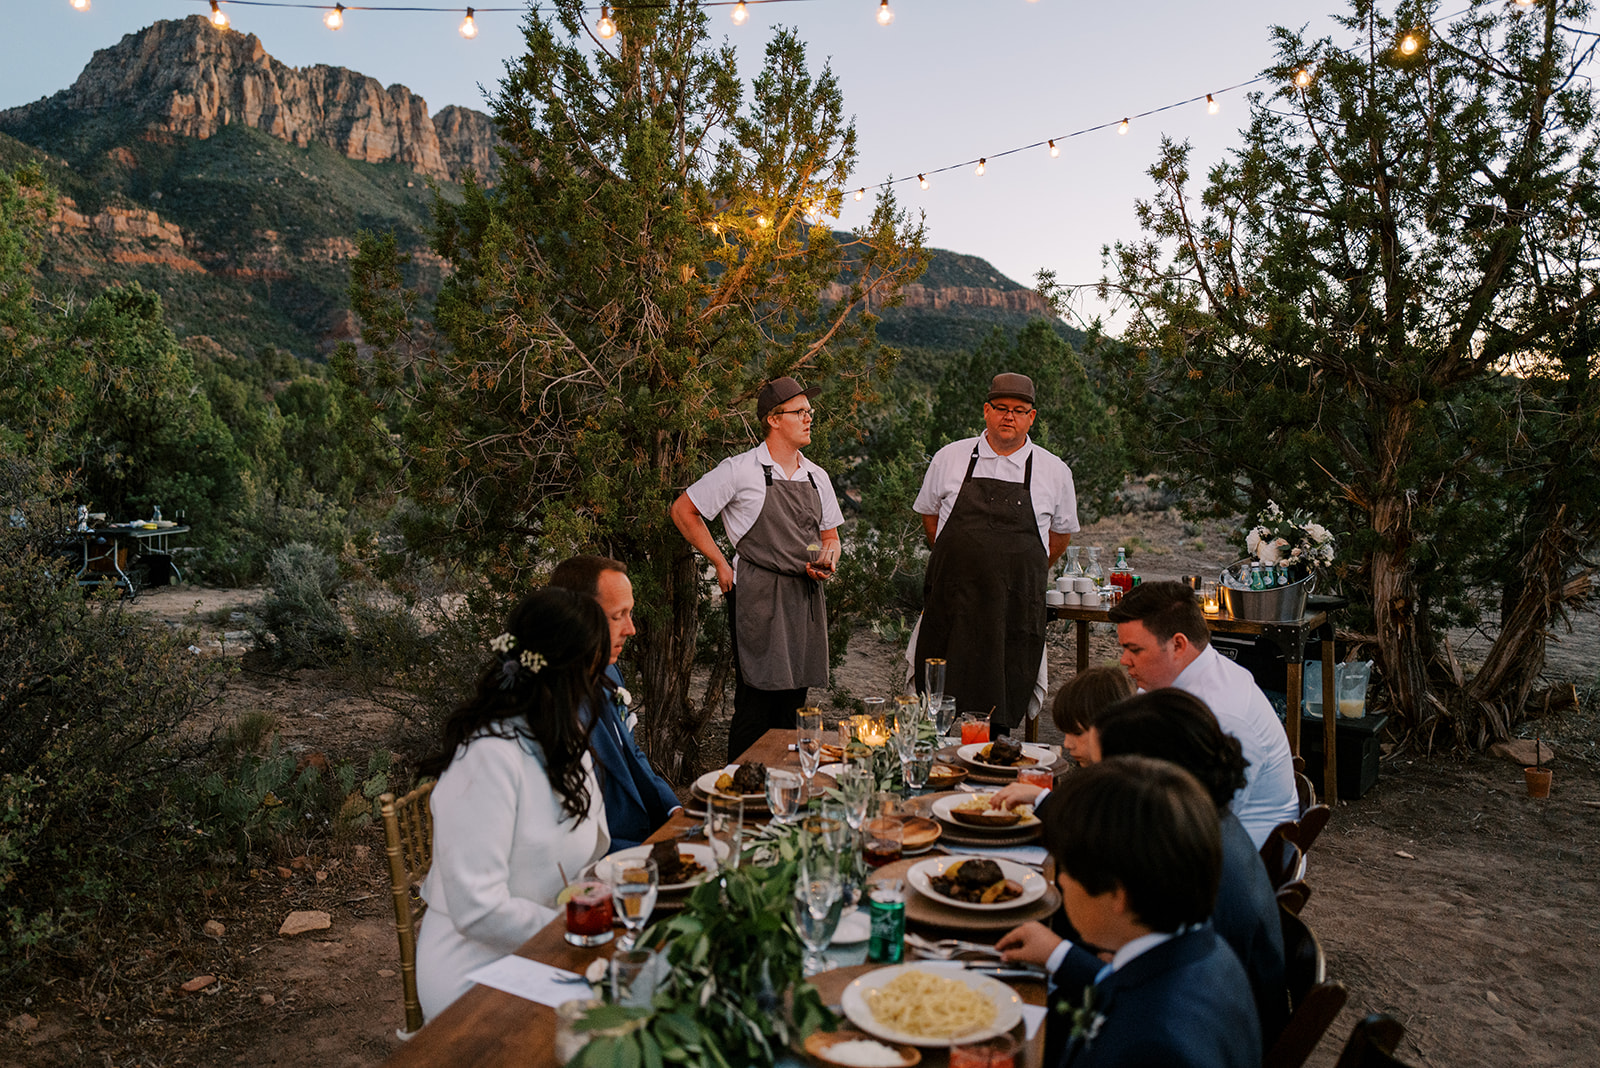 Private dinner catered by a private chef after the wedding on BLM land outside of Zion National Park